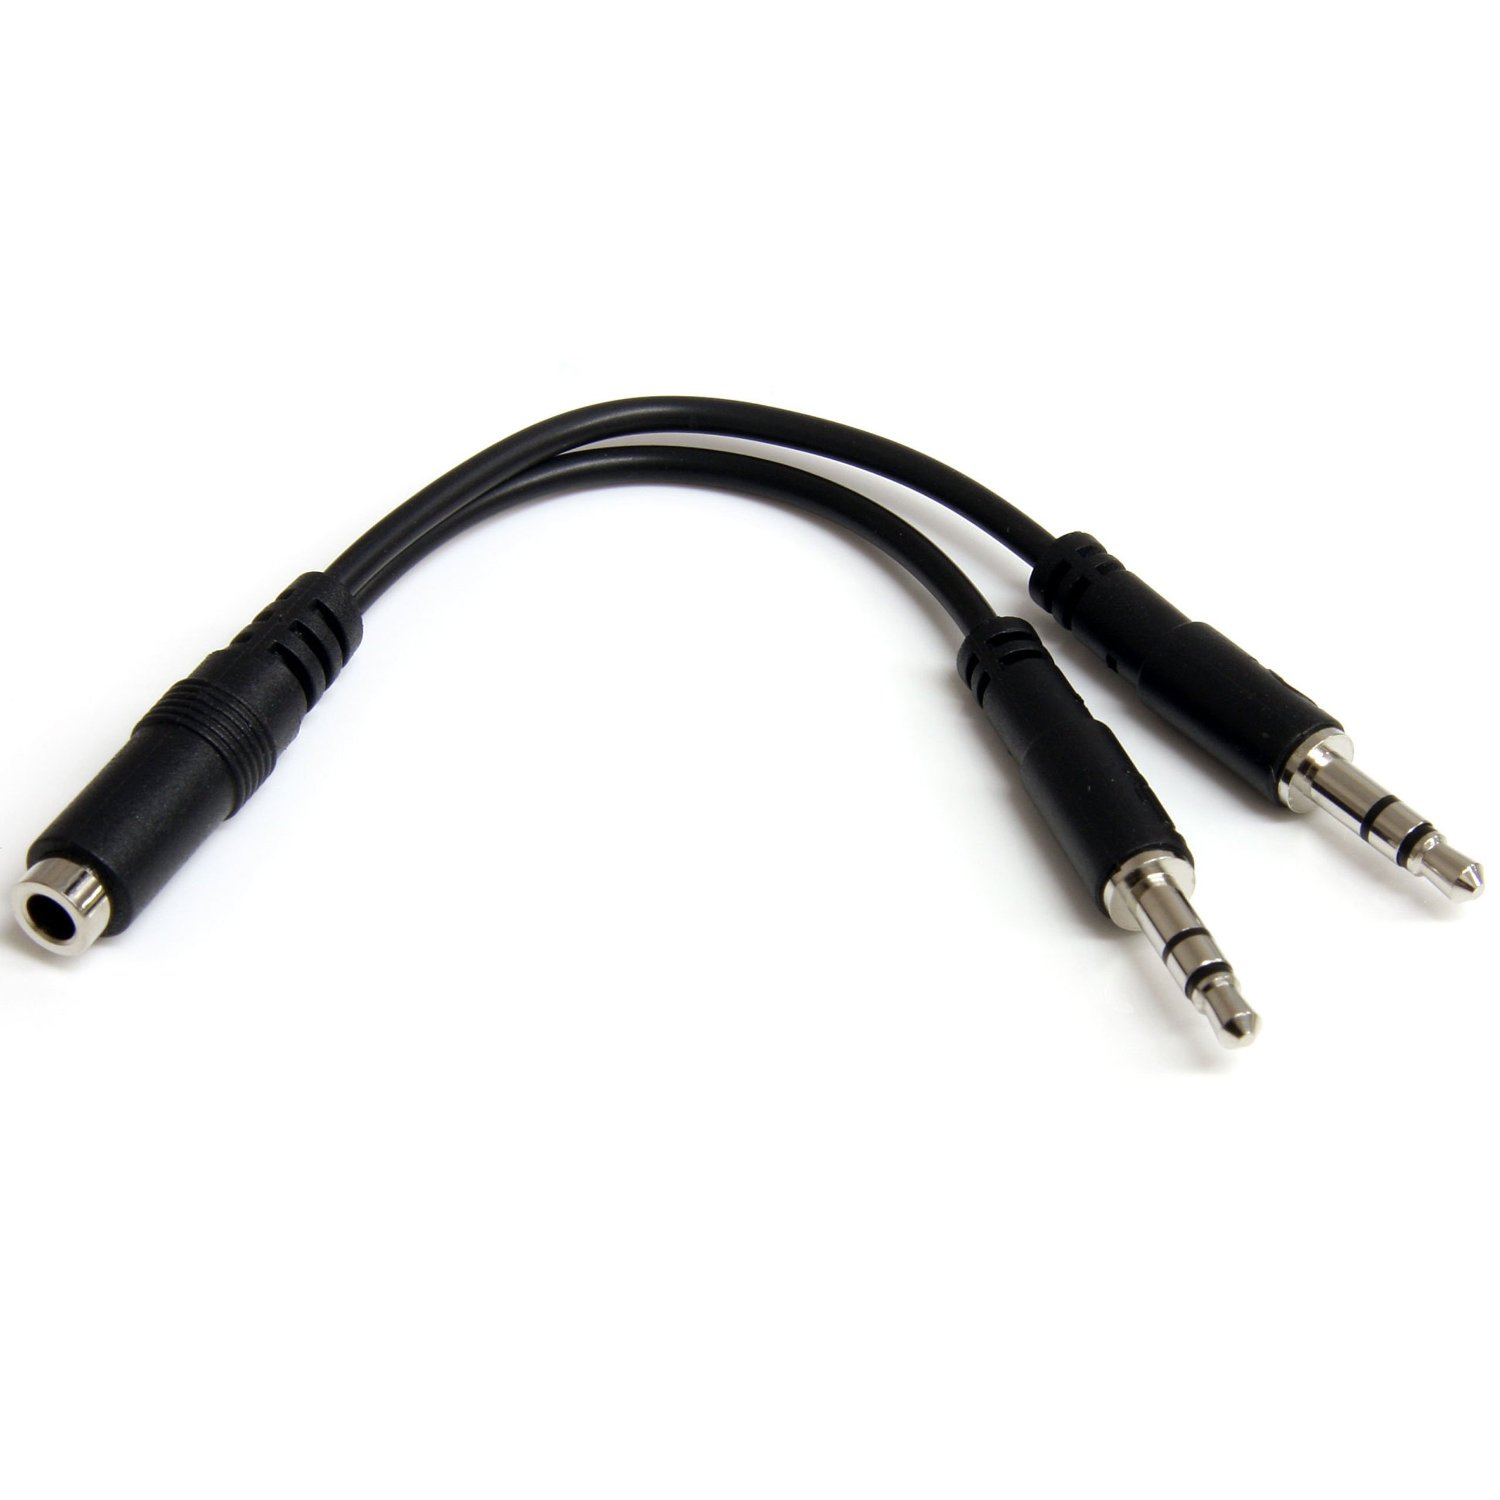 NGS SINGERFIRE - Micro filaire prise jack 6,3mm - cable 3m - noir